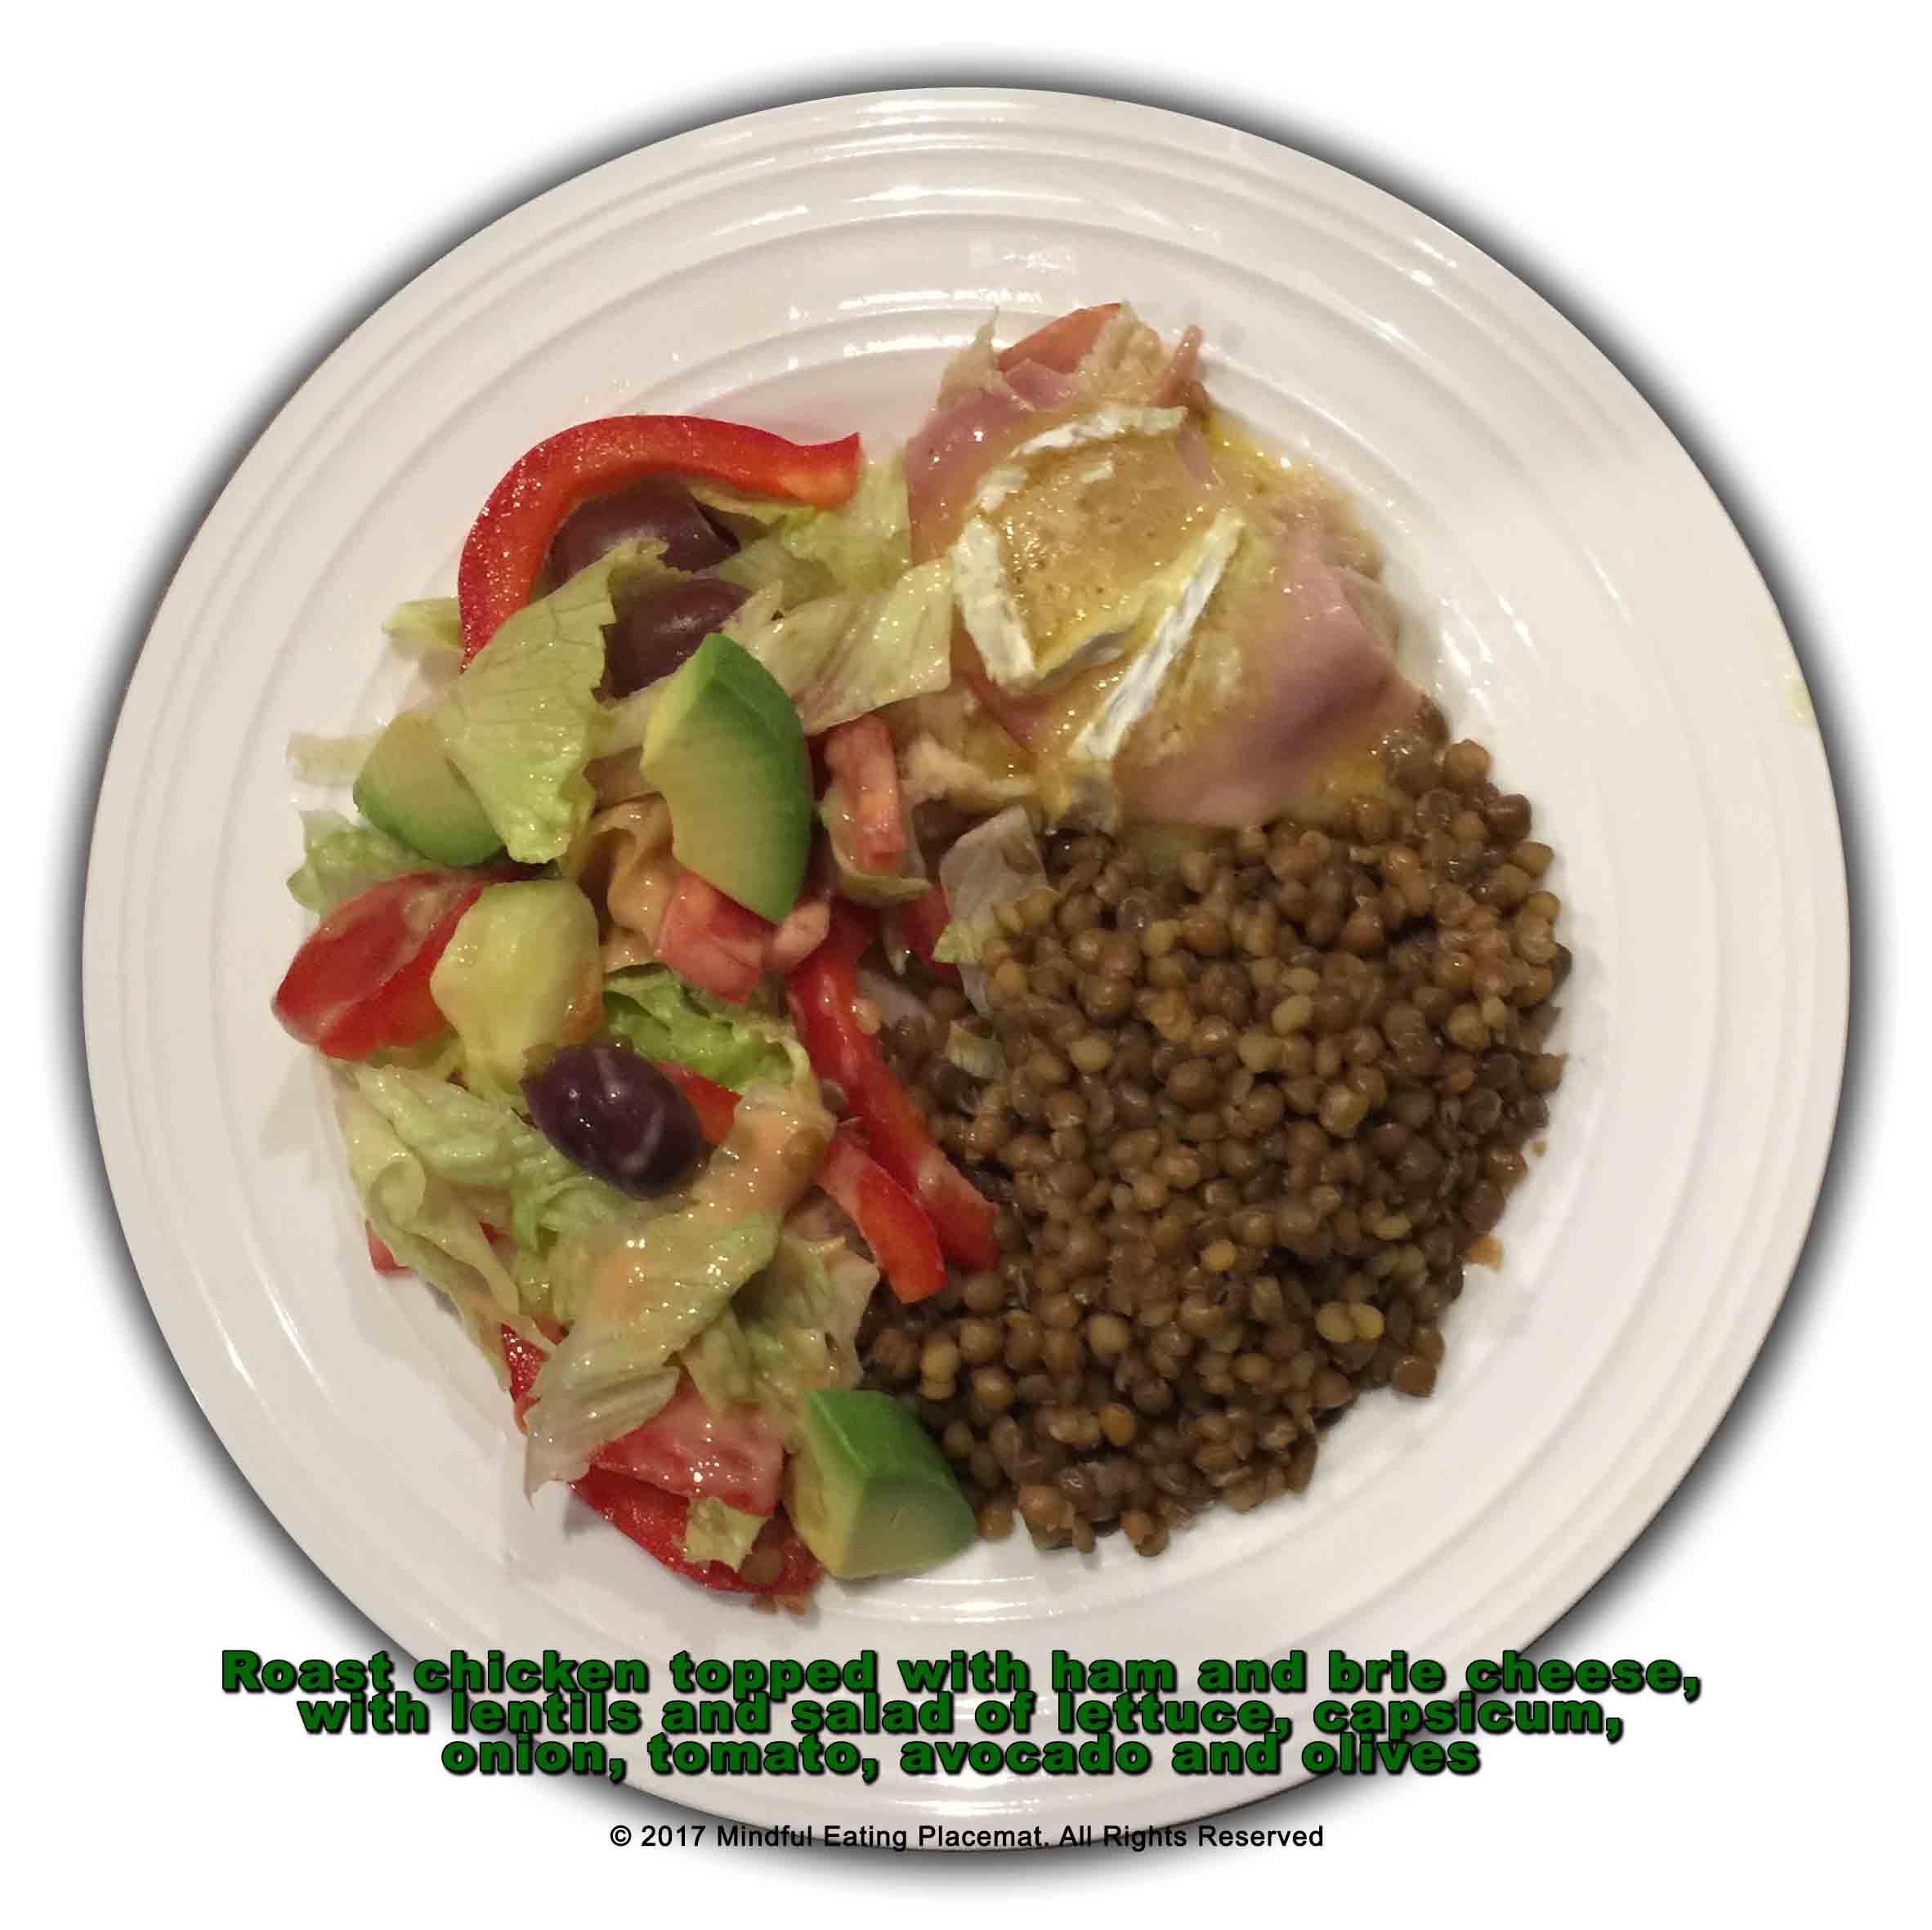 Chicken topped with ham and brie, with lentils and a salad